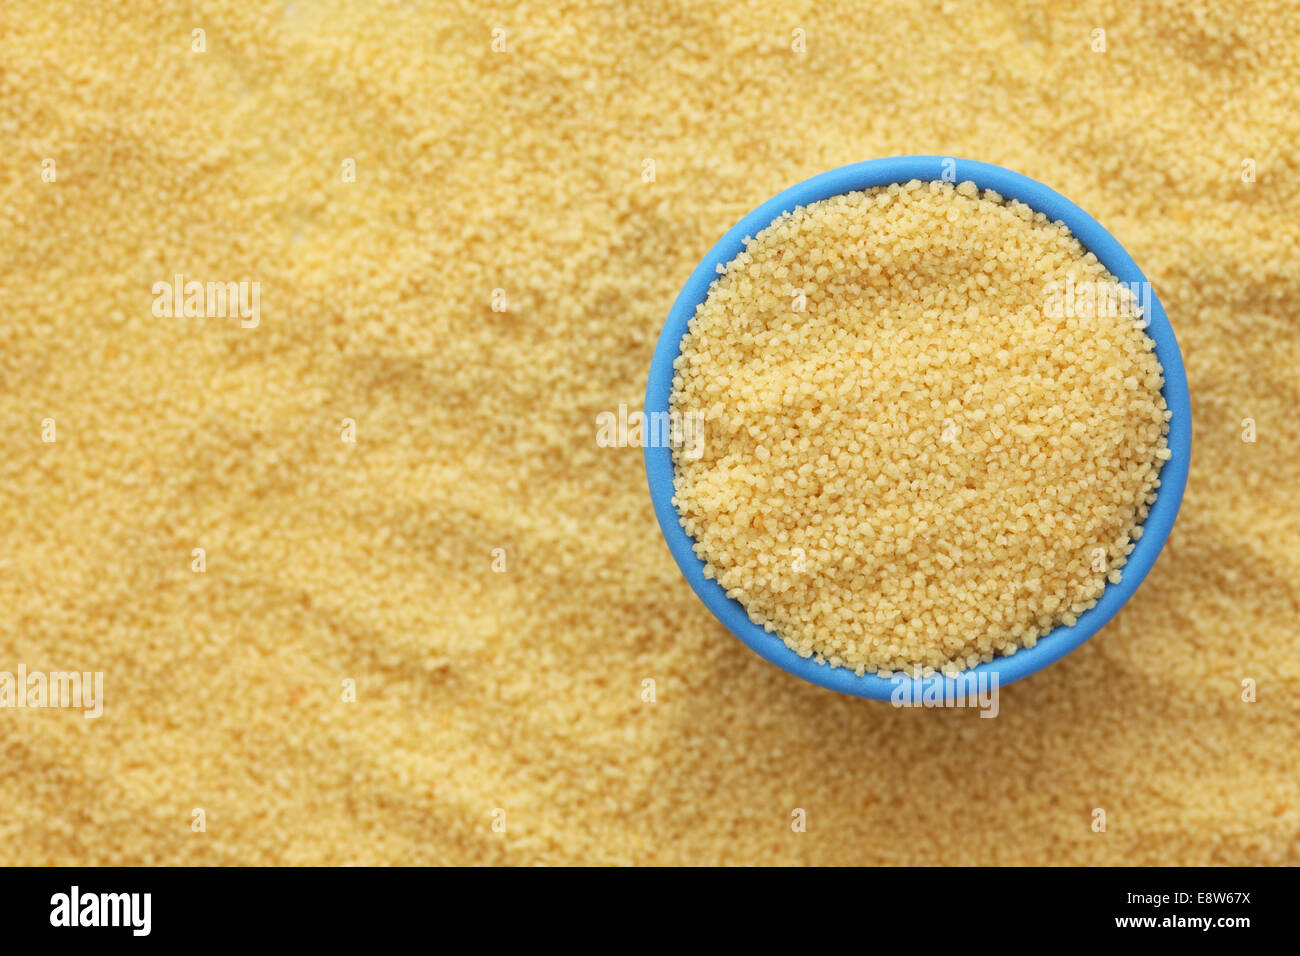 Couscous in a blue bowl on couscous background. Close-up. Stock Photo